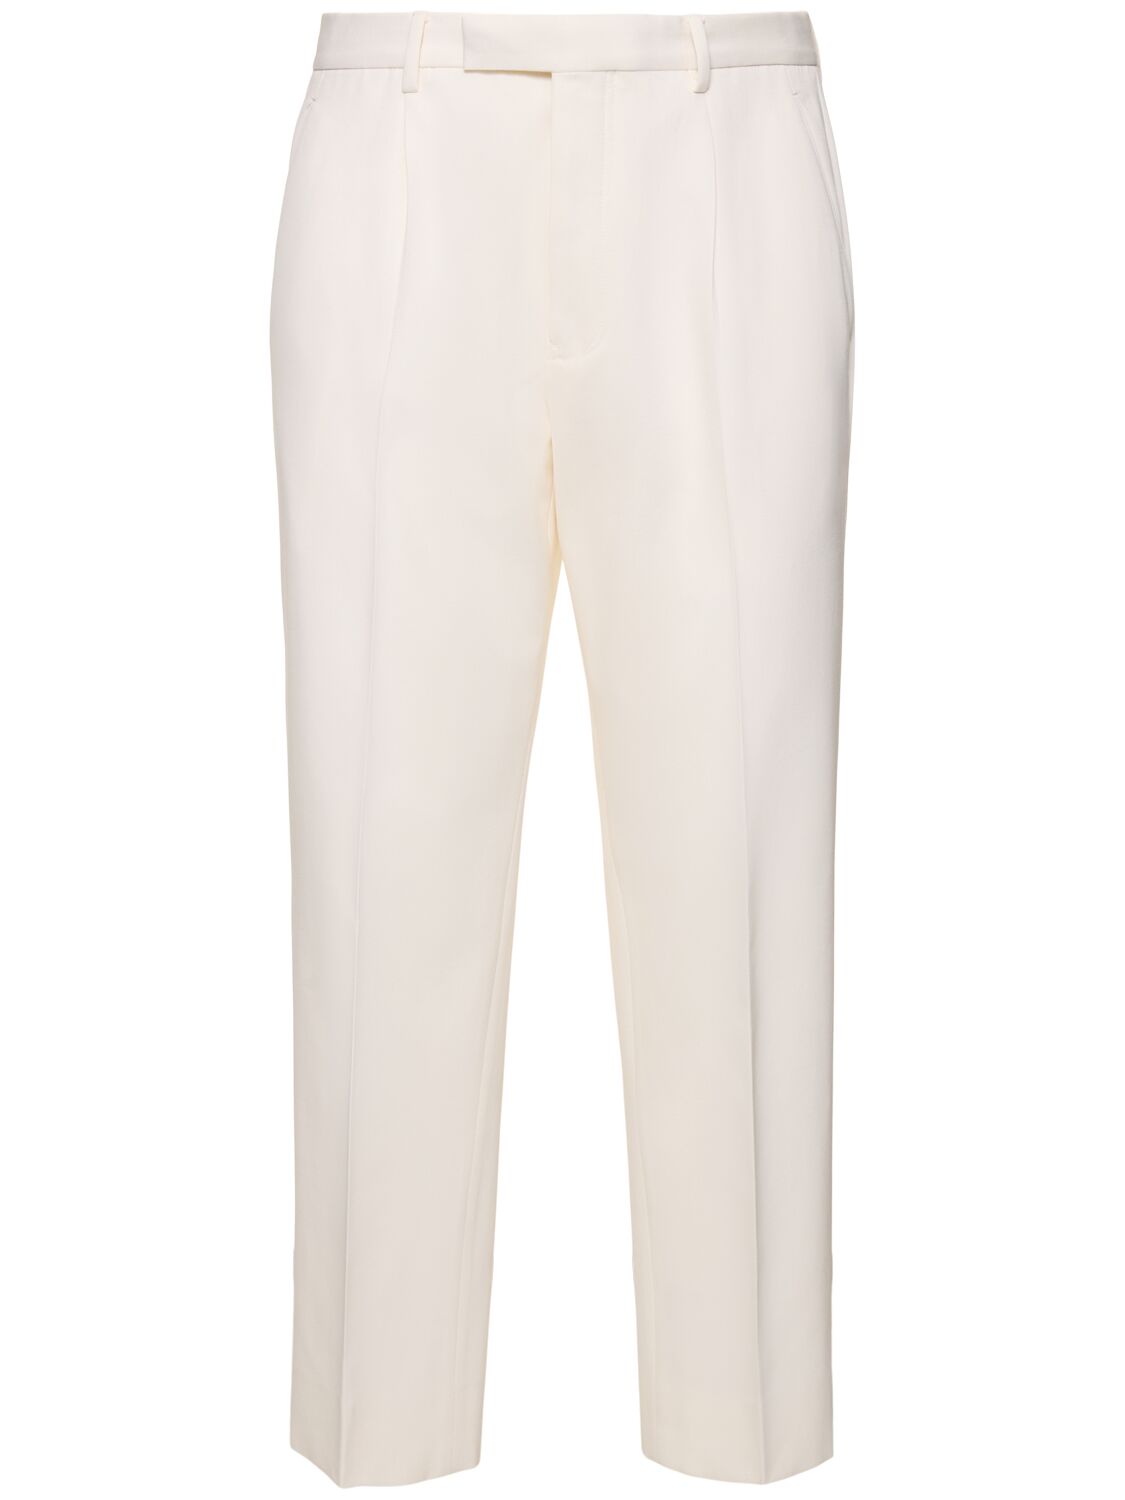 Zegna Cotton & Wool Pleated Pants In White